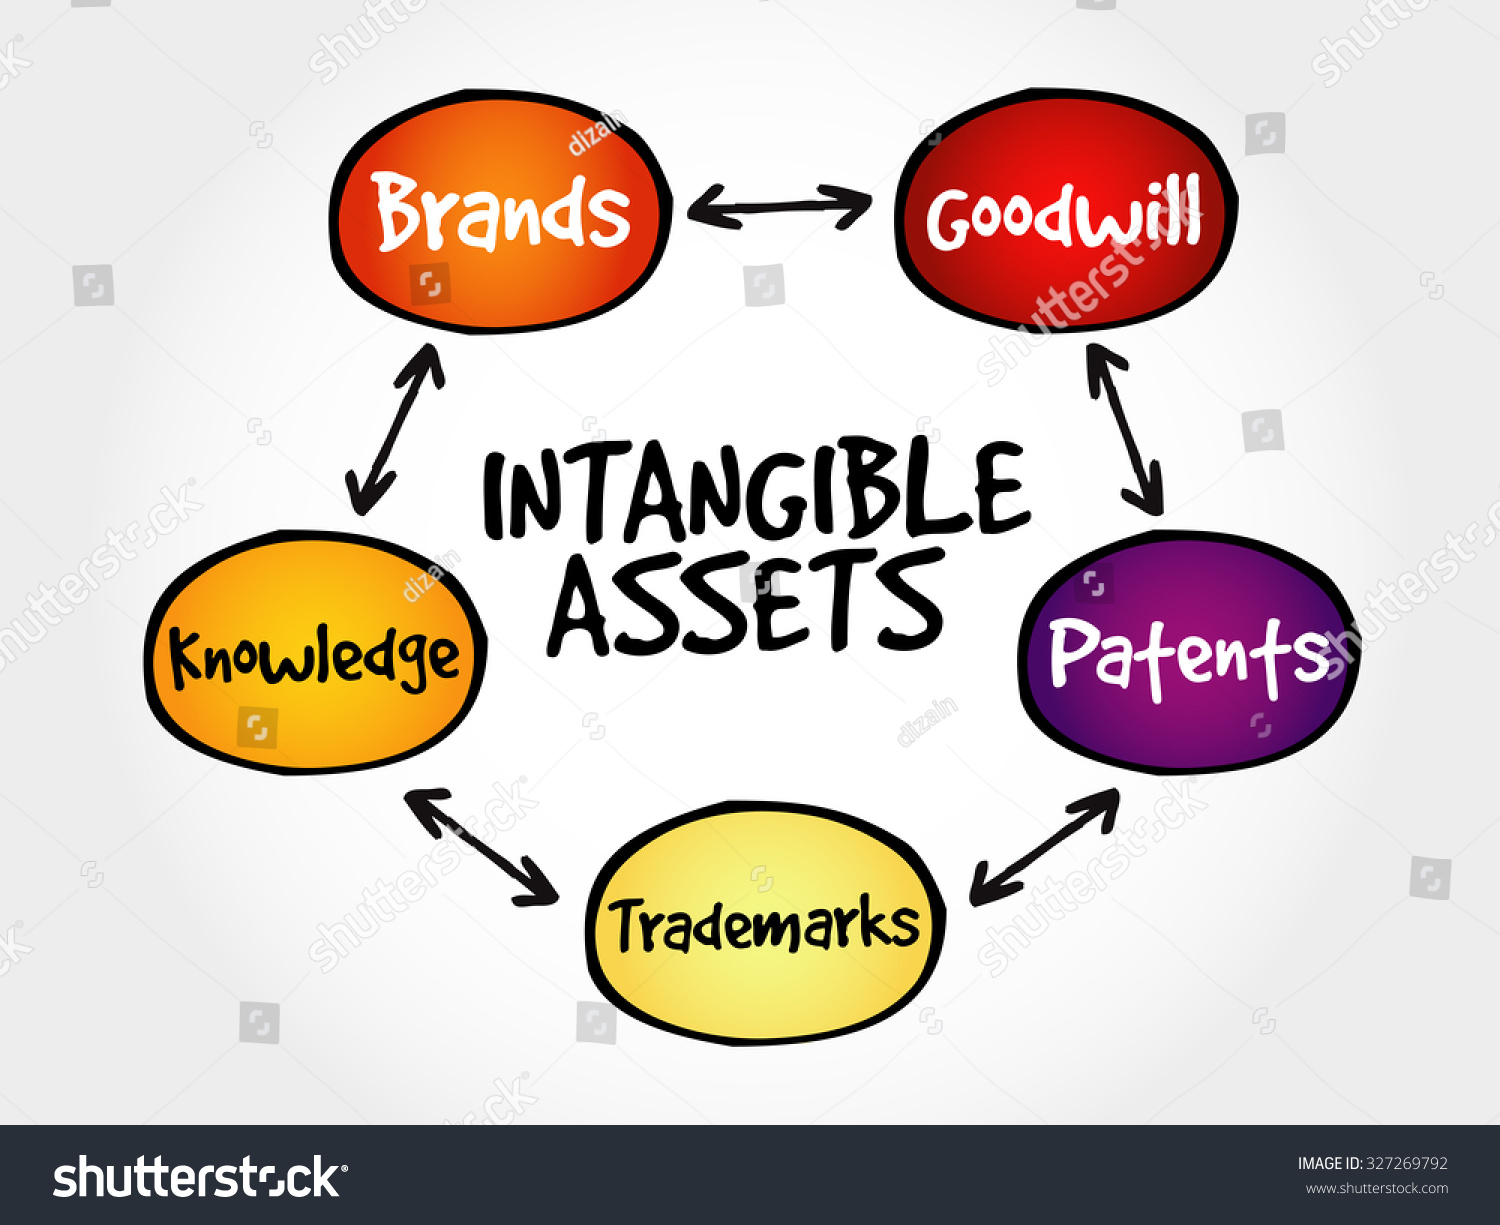 Intangible Assets Types Strategy Mind Map Stock Vector Royalty Free 327269792 Shutterstock 1817